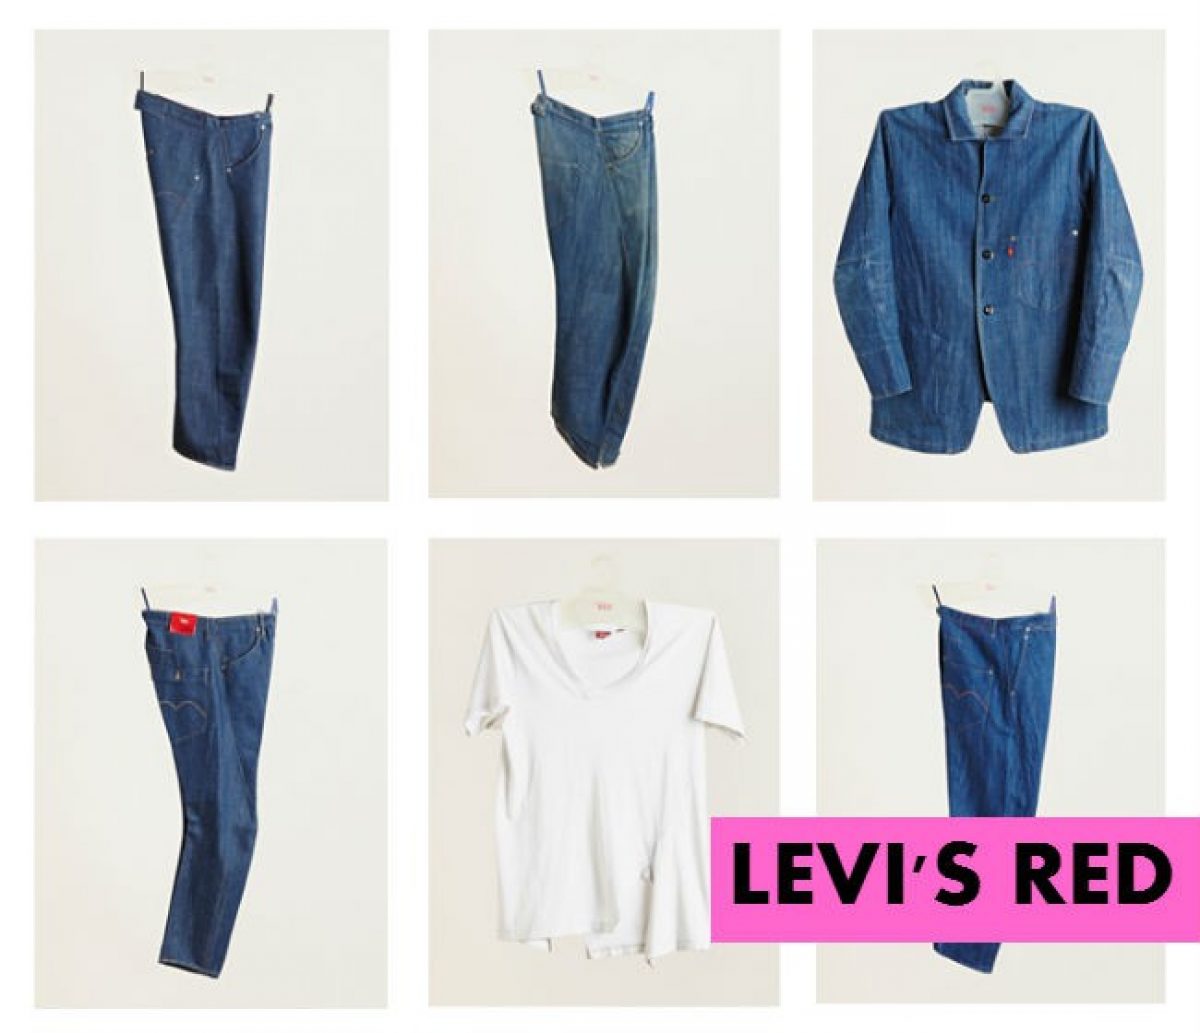 levis lined red jeans